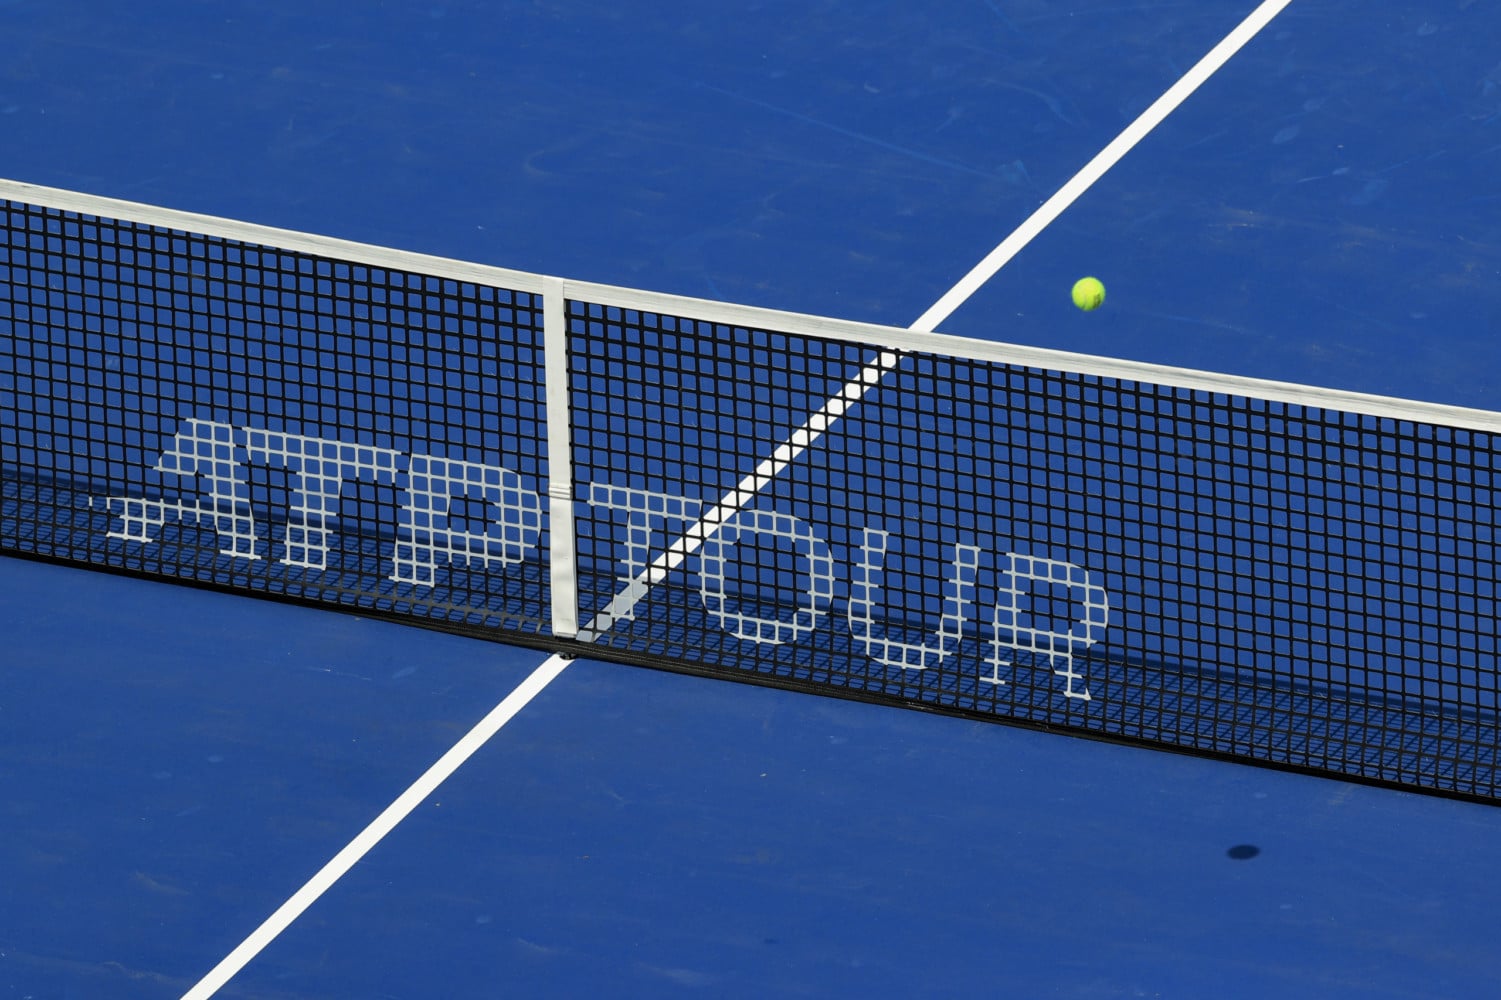 Tennis ball moving over net branded with ATP Tour logo